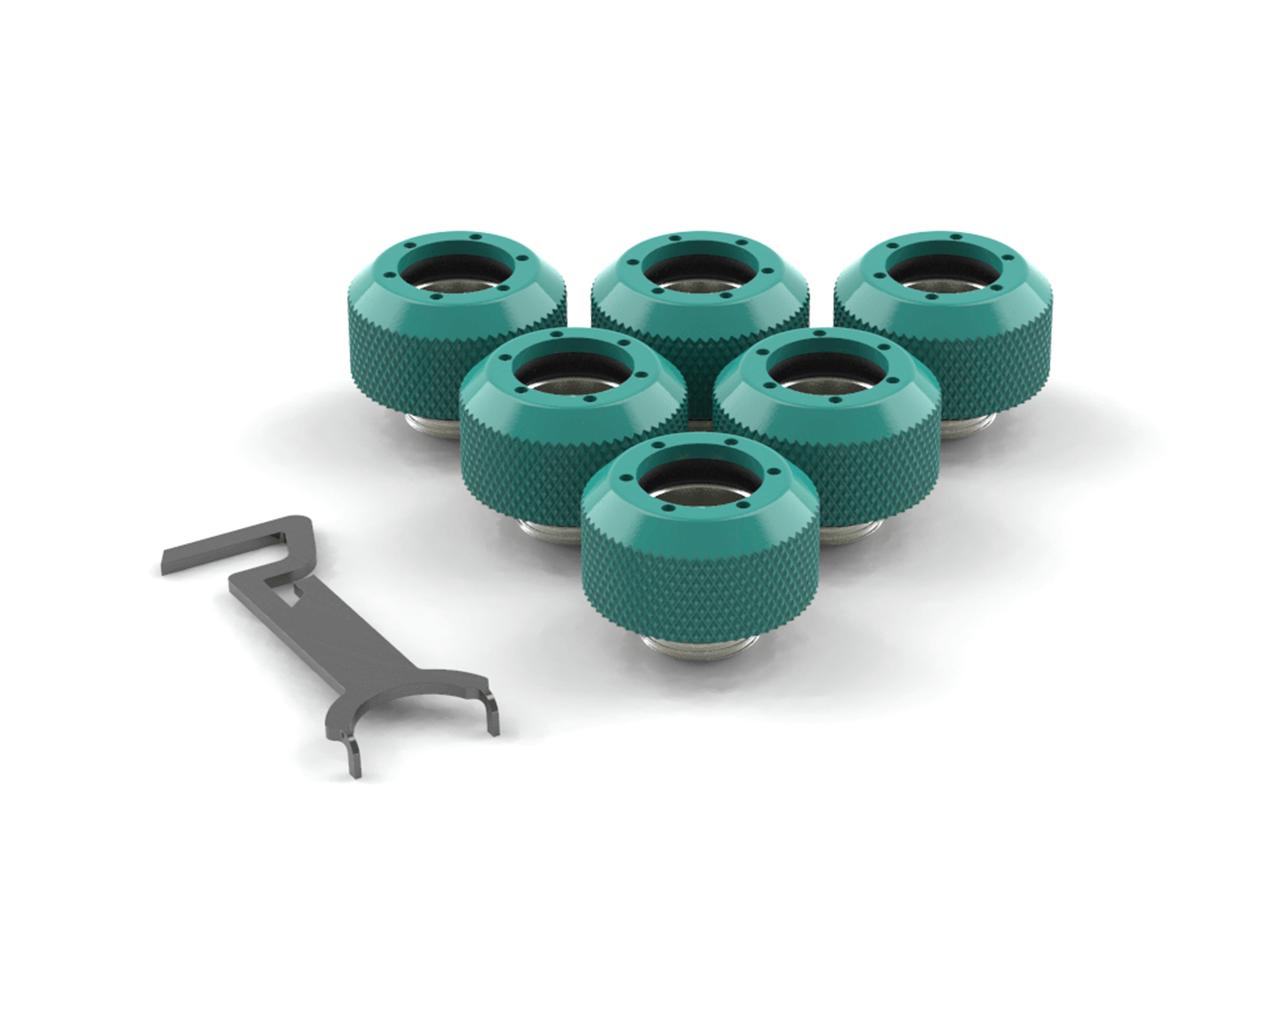 PrimoChill 1/2in. Rigid RevolverSX Series Fitting - 6 pack - PrimoChill - KEEPING IT COOL Teal